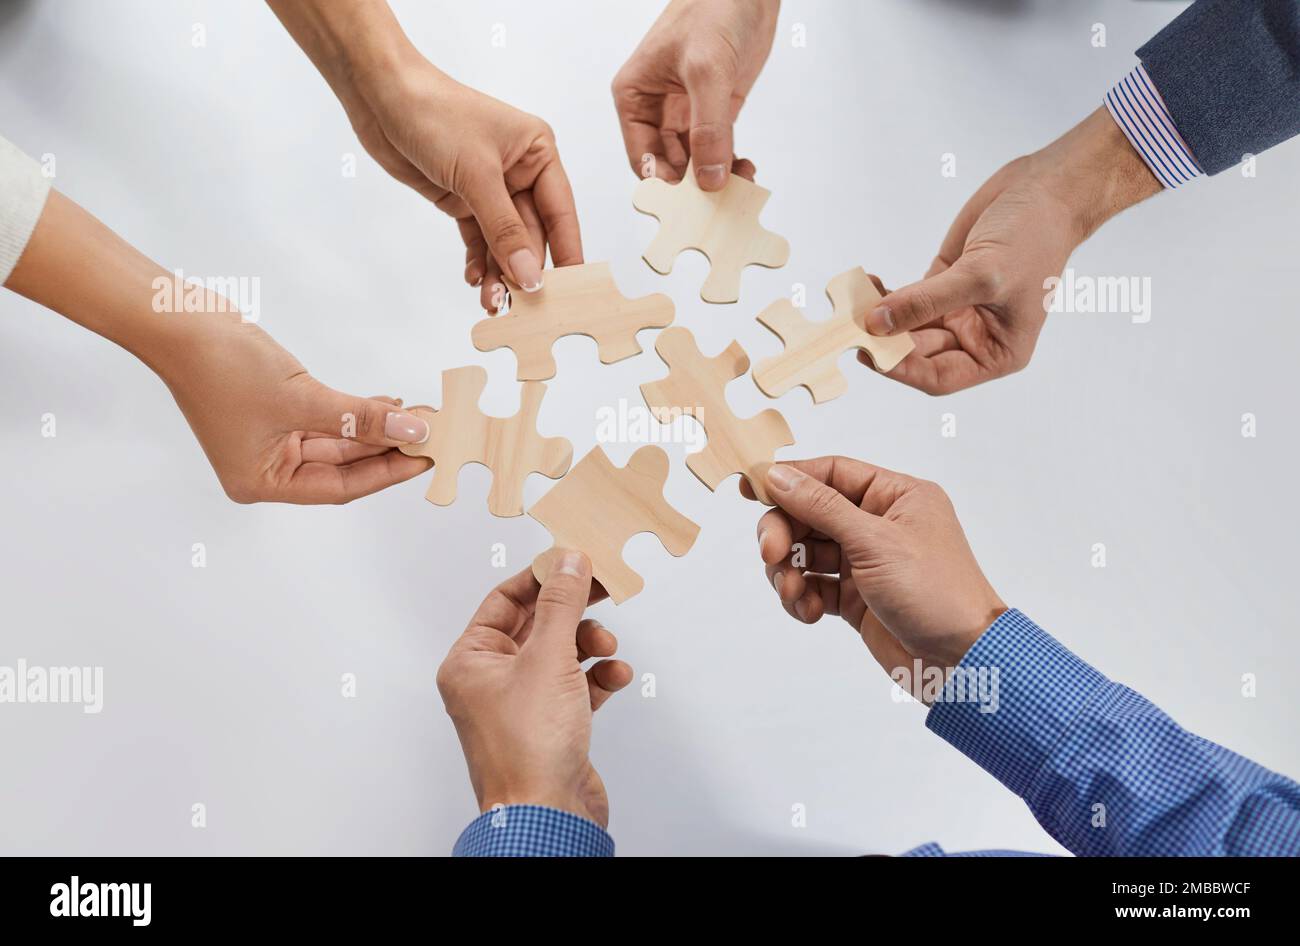 Hands of group of business people assembling jigsaw puzzle. cooperation, teamwork support concept. Stock Photo